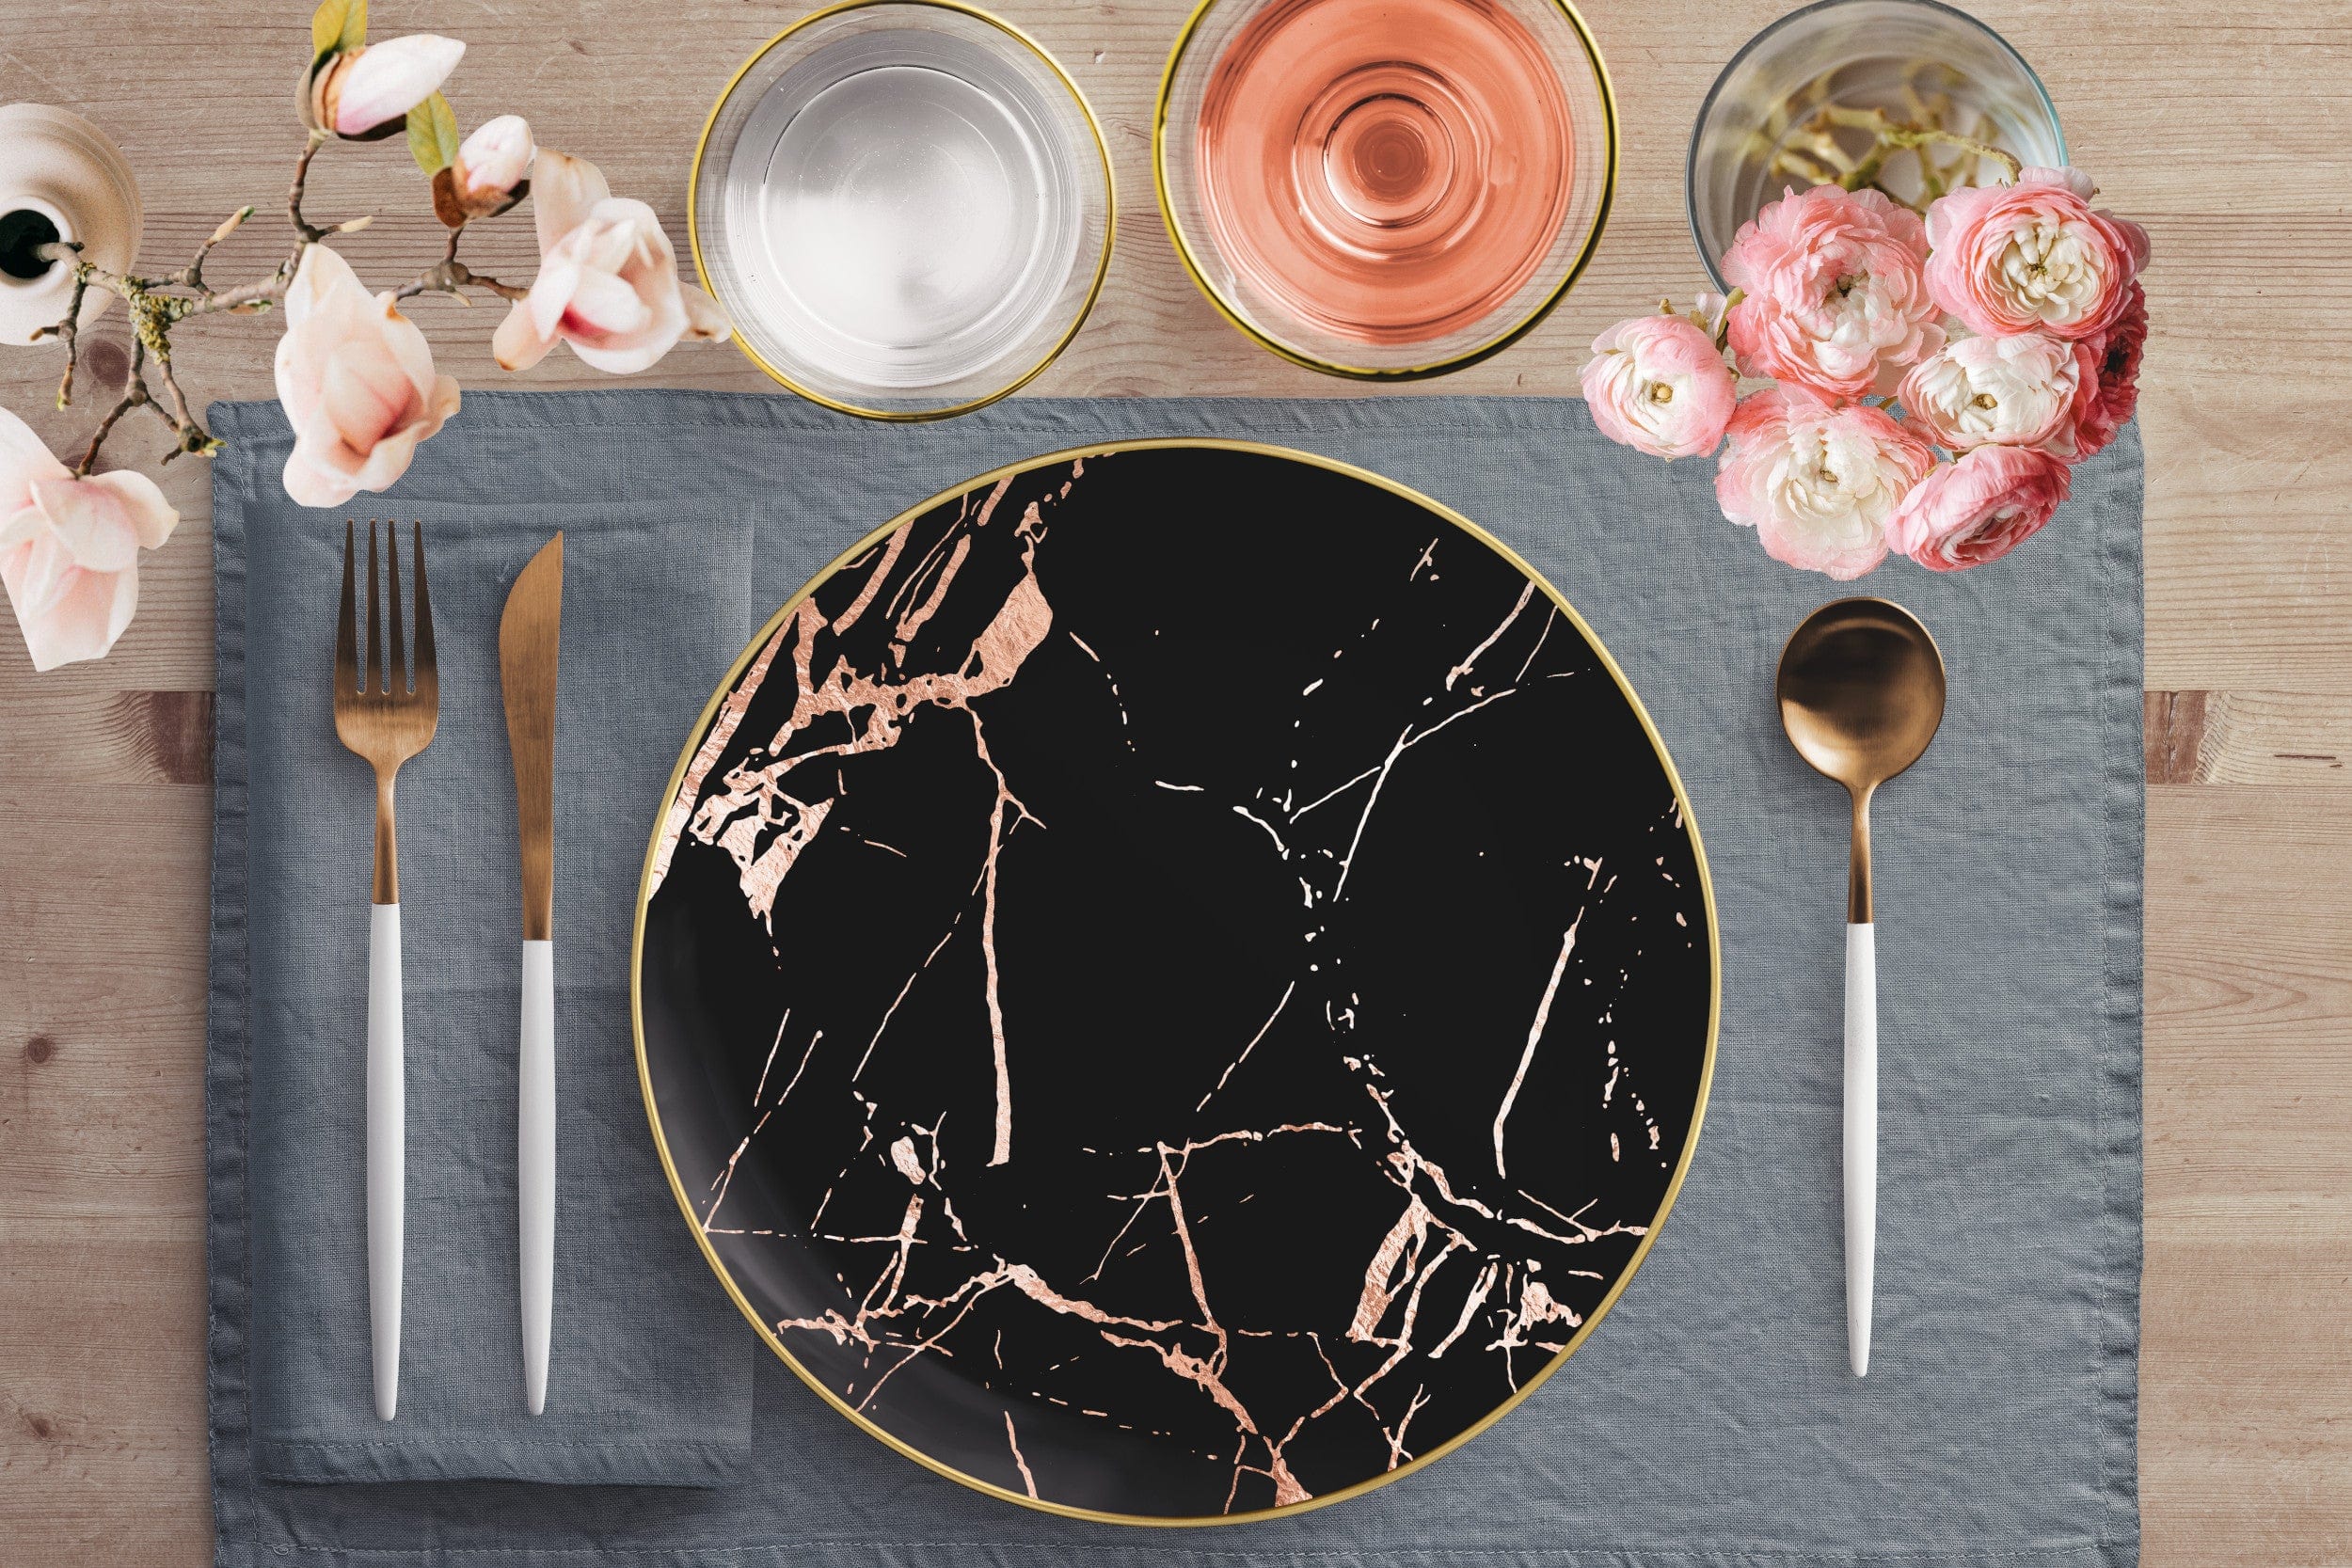 Kate McEnroe New York Dinner Plates in Luxurious Black &amp; Gold Marble Veins with Gold Rim Plates Single 9820SINGLE